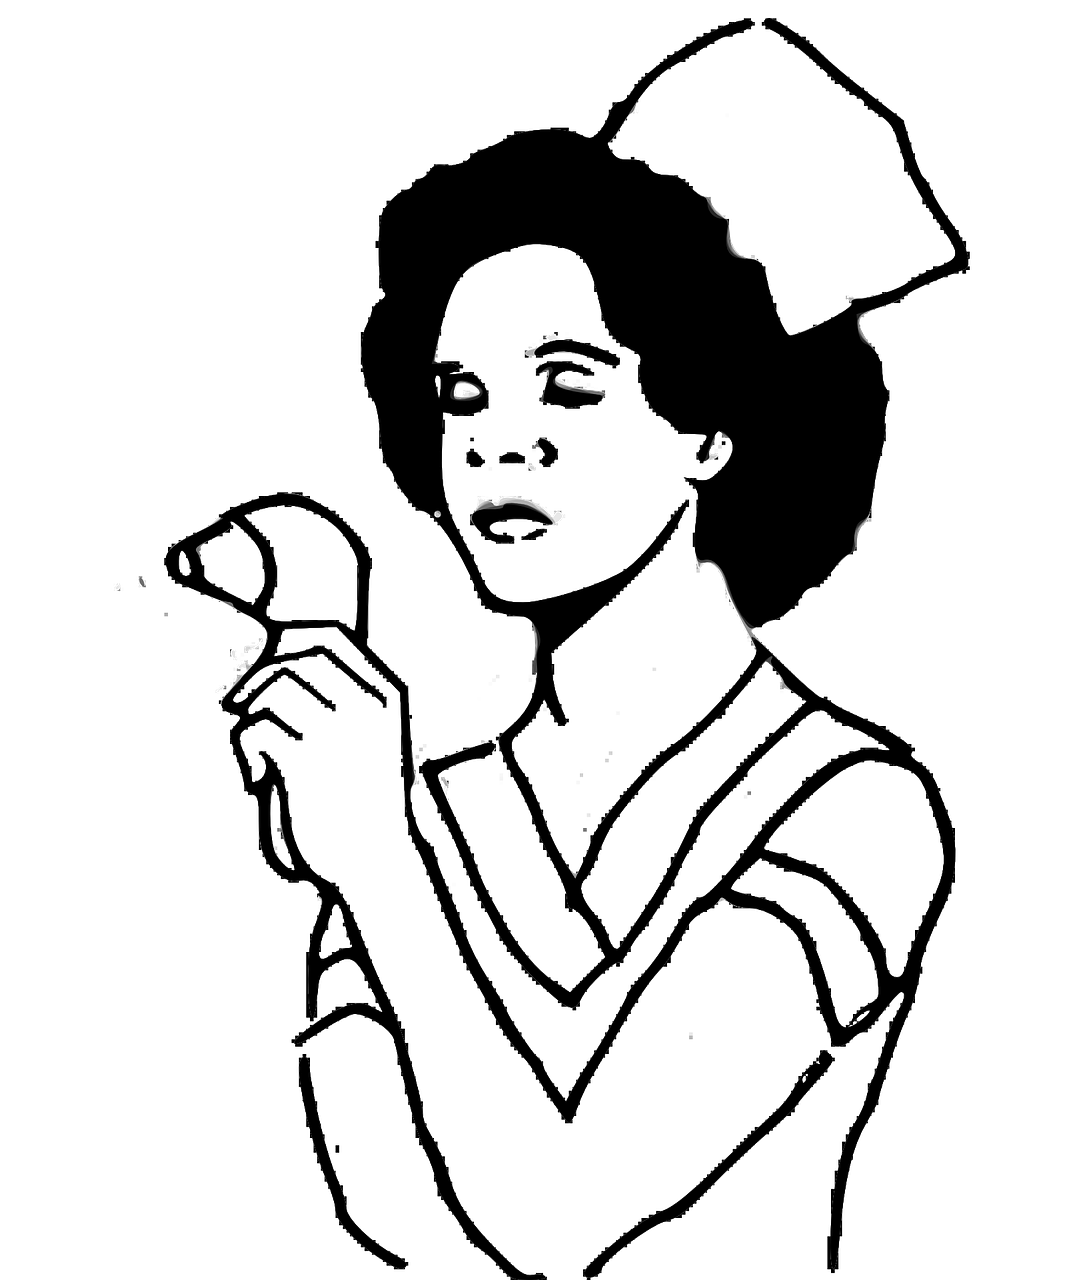 a black and white drawing of a woman holding a cell phone, inspired by Carrie Mae Weems, tumblr, ascii art, made in paint tool sai2, she is eating a peach, sigourney weaver, uncompressed png